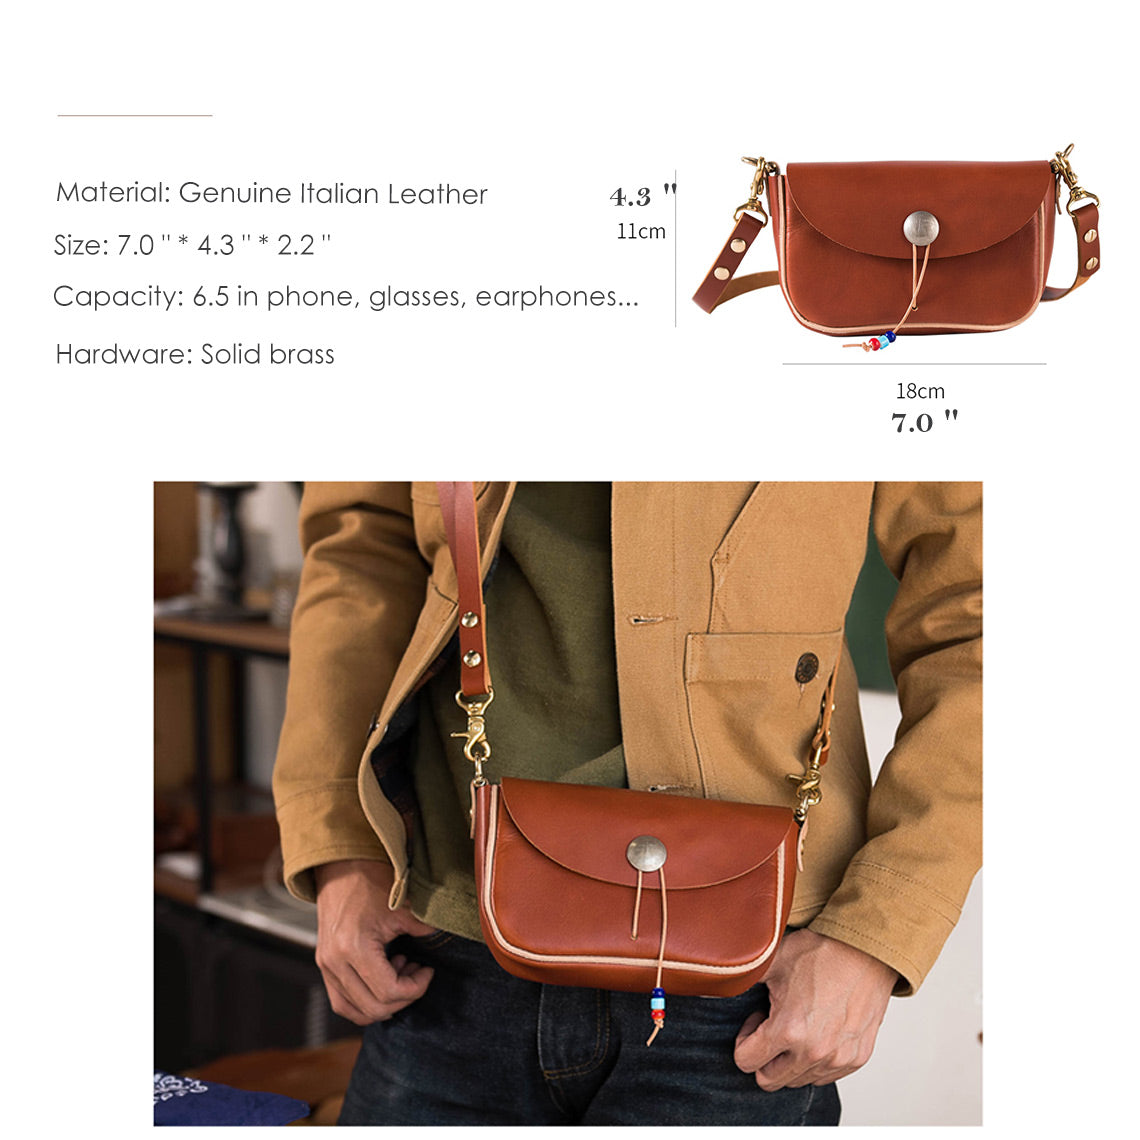 Red leather crossbody bag size and capacity | DIY cell phone bag